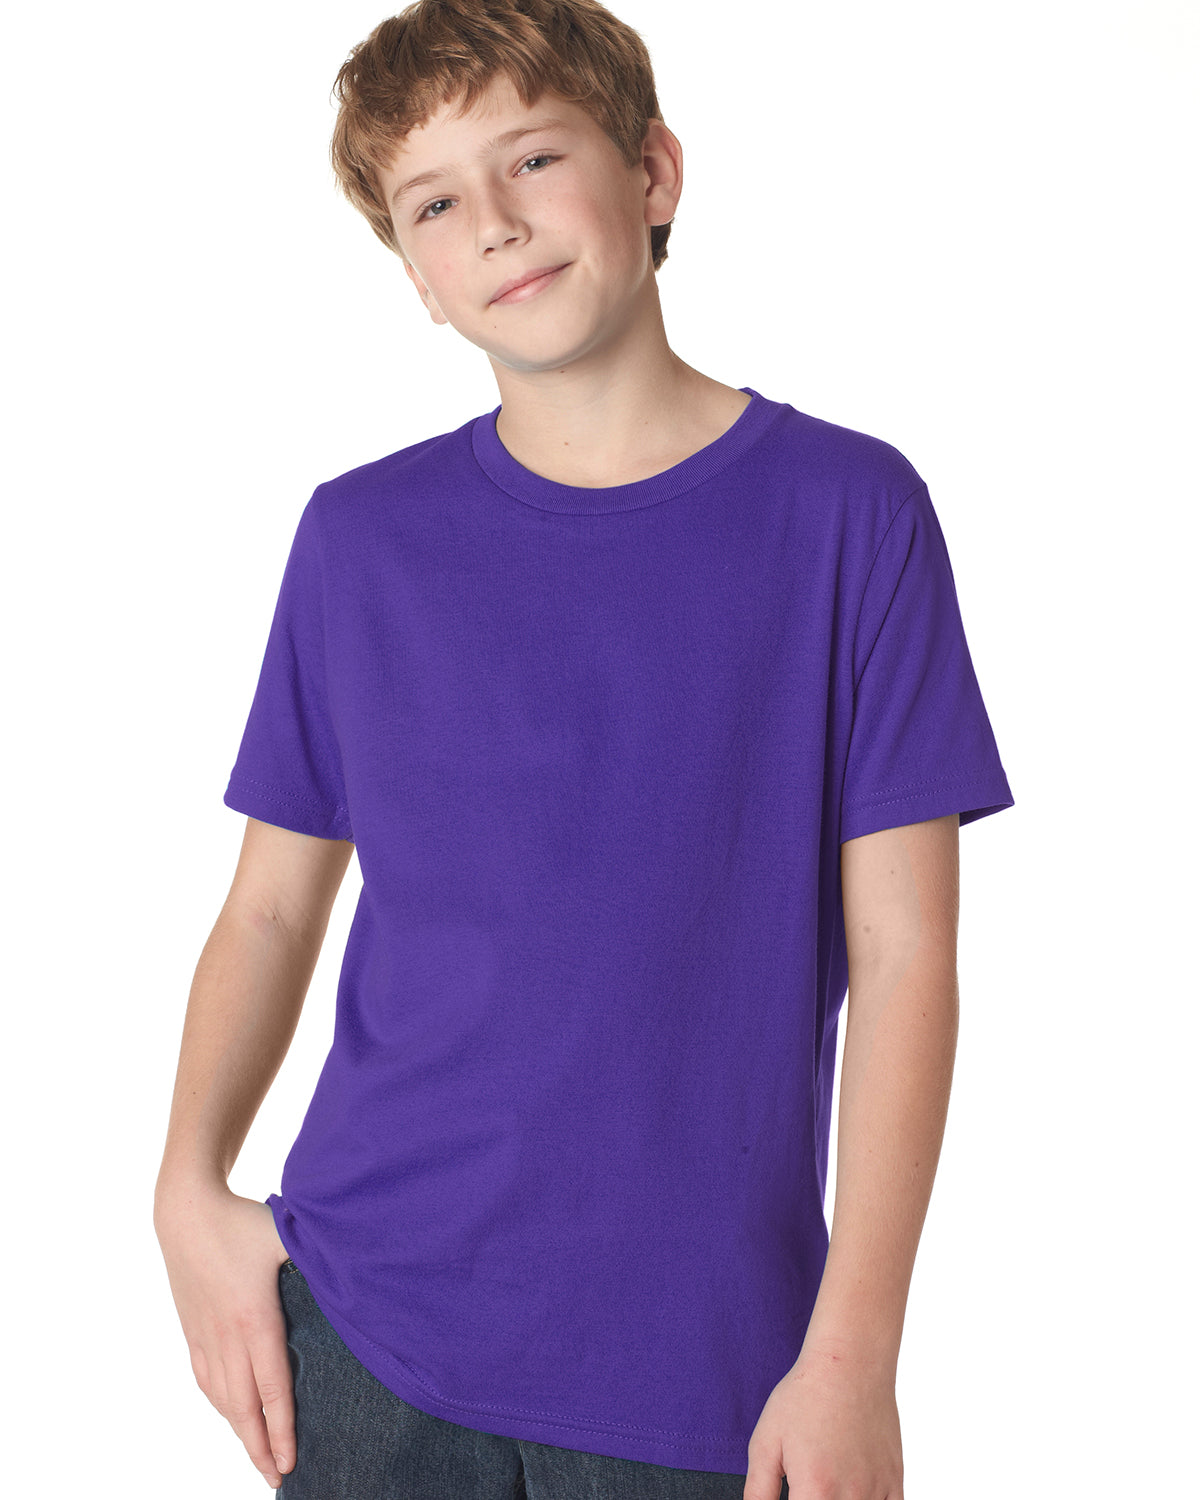 child model wearing next level youth tee in purple rush